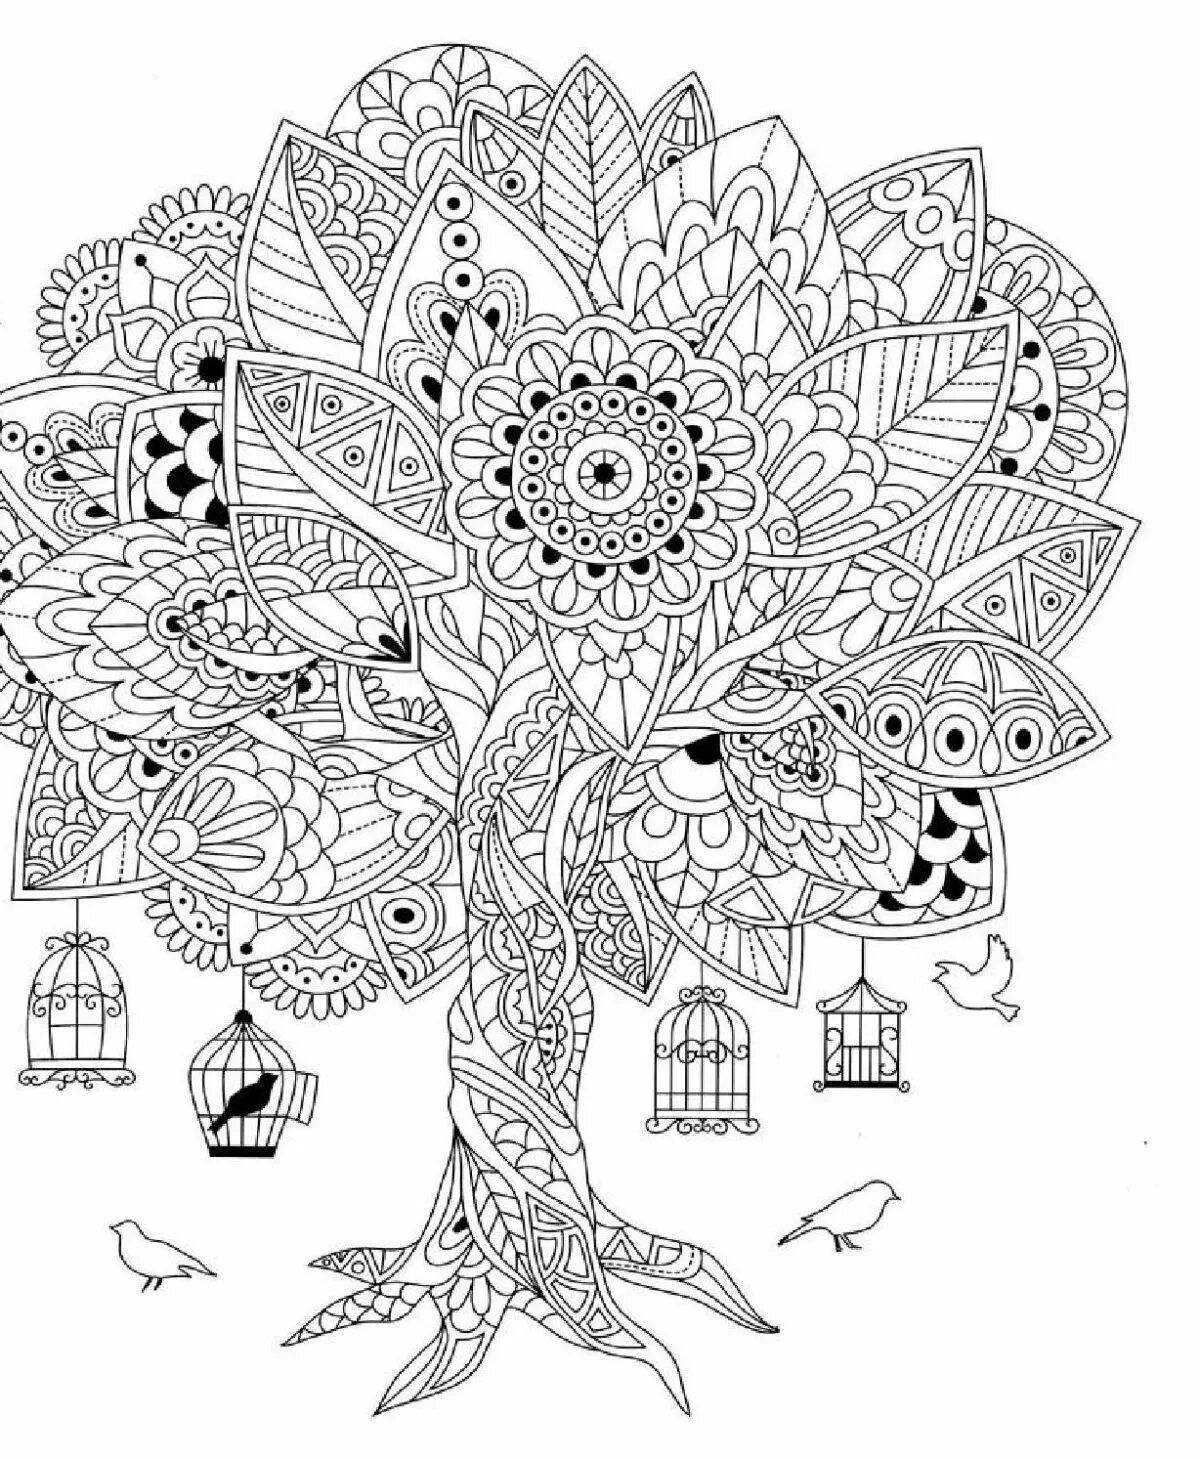 Invigorating coloring book for meditation and relaxation